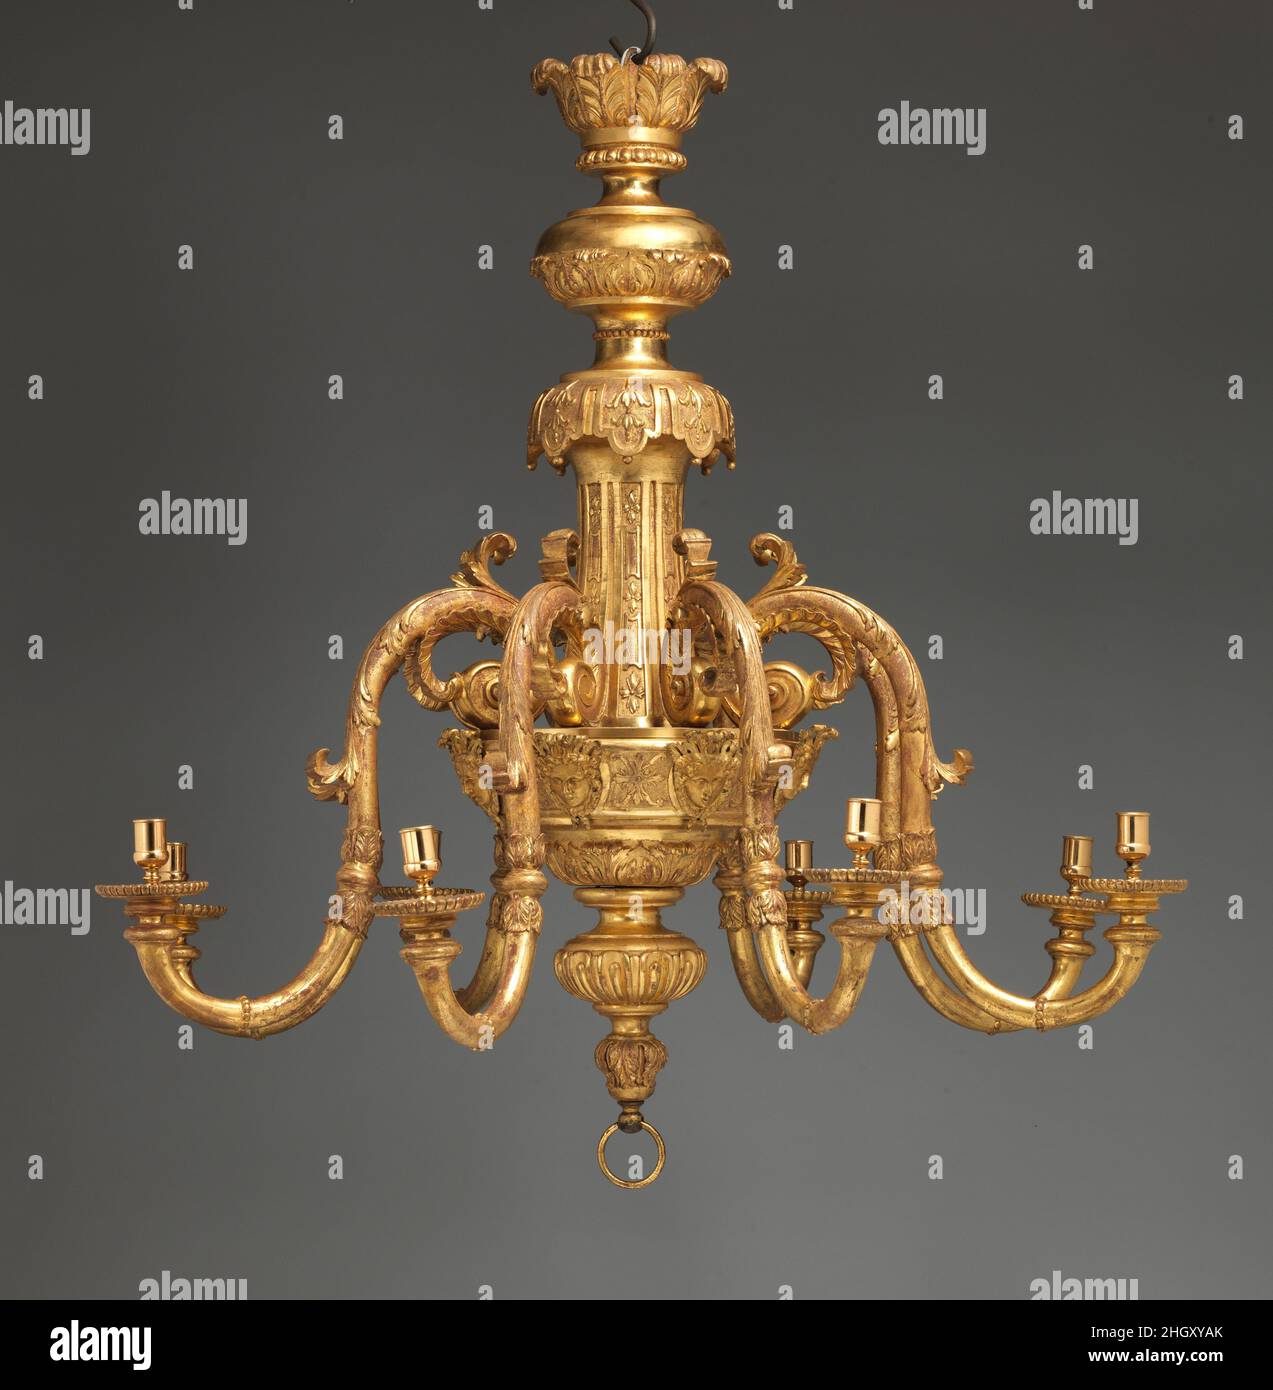 Chandelier ca. 1710–15 Attributed to John Gumley This is one of a pair of chandeliers commissioned about 1710 by James, third Viscount Scudamore (1684–1716), for the state apartments at Holme Lacy, Herefordshire.[1] They may have been ordered to celebrate his marriage in 1710. In the richly decorated Baroque plasterwork of the saloon and dining room where they were hung, the chandeliers were a particularly harmonious addition. Holme Lacy later descended to the earls of Chesterfield; it was sold in 1910 by the tenth earl, who in 1917 moved many of the contents to Beningbrough Hall, North Yorksh Stock Photo